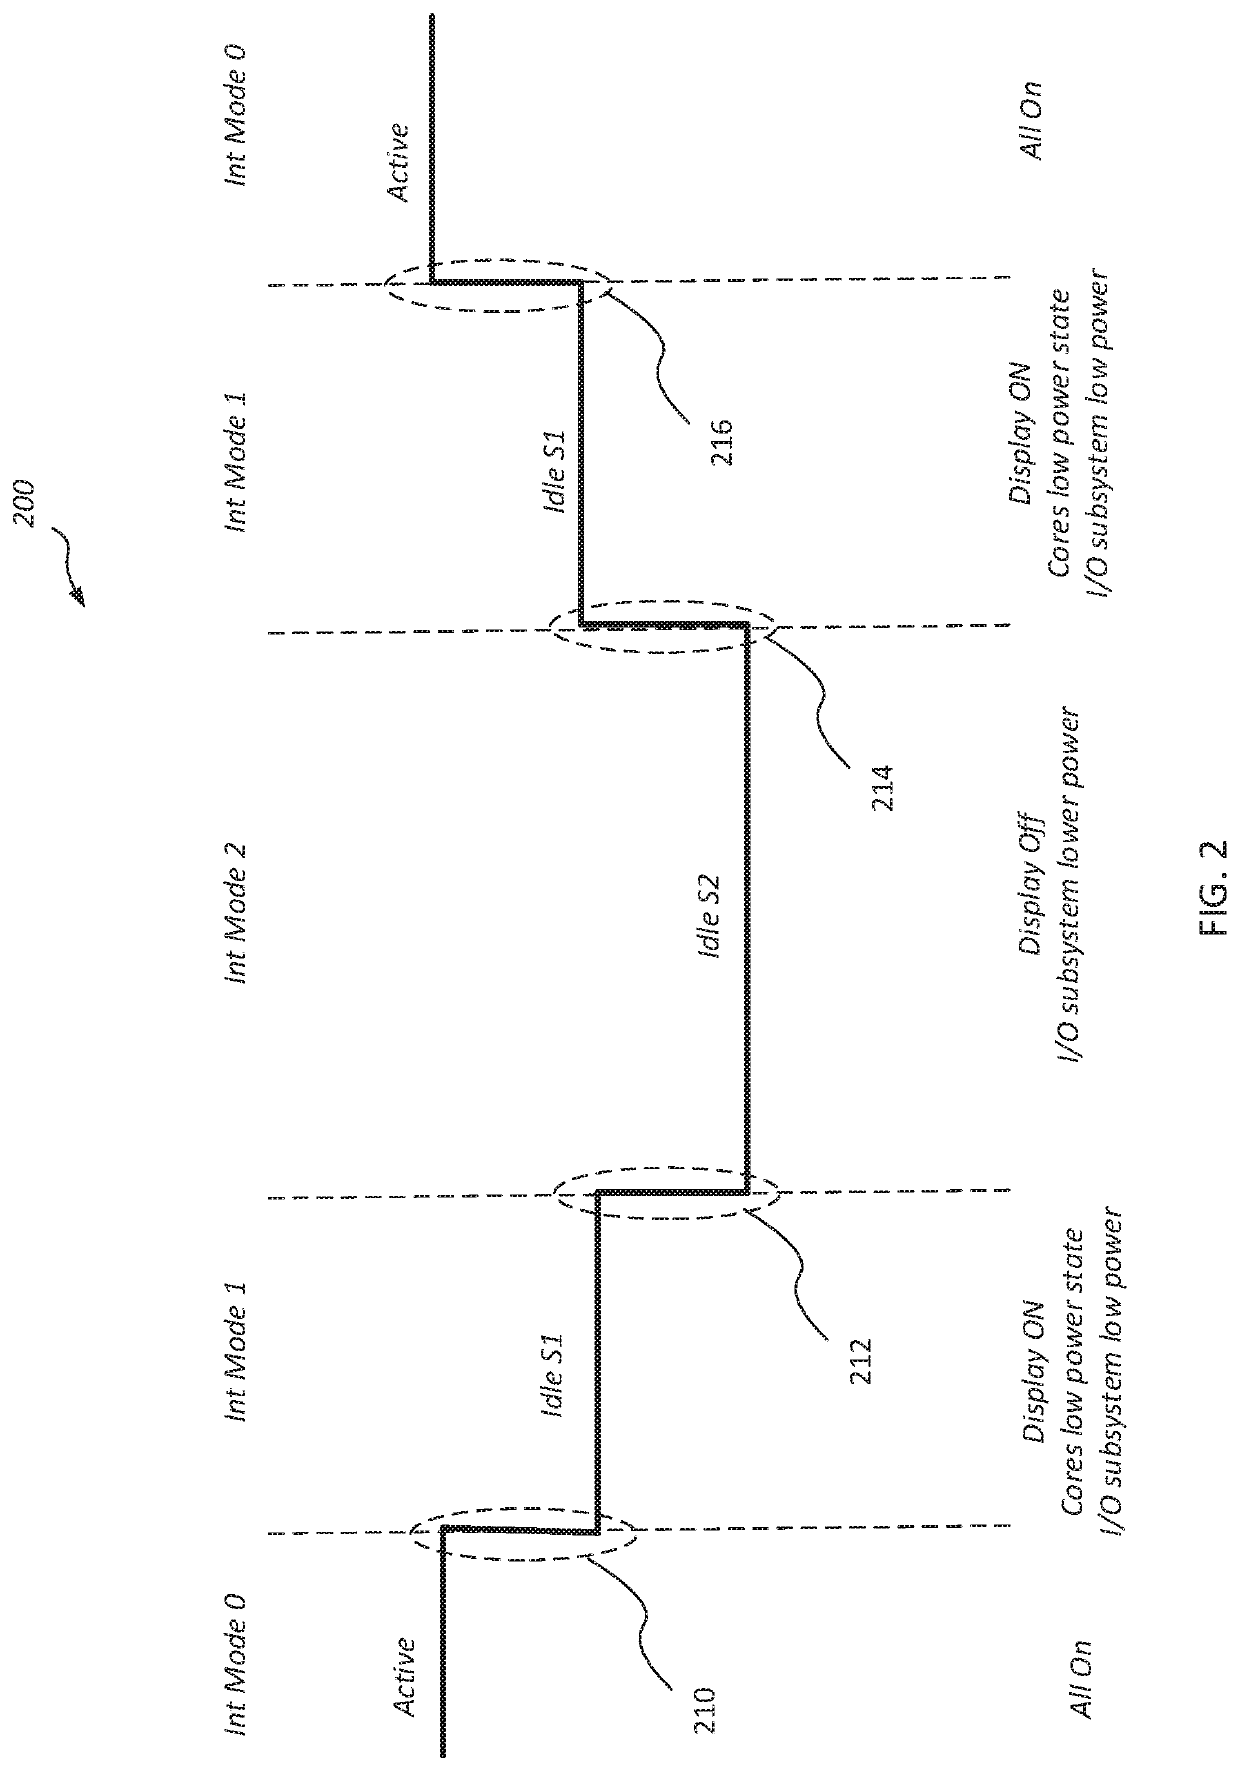 Dynamic interrupt rate control in computing system